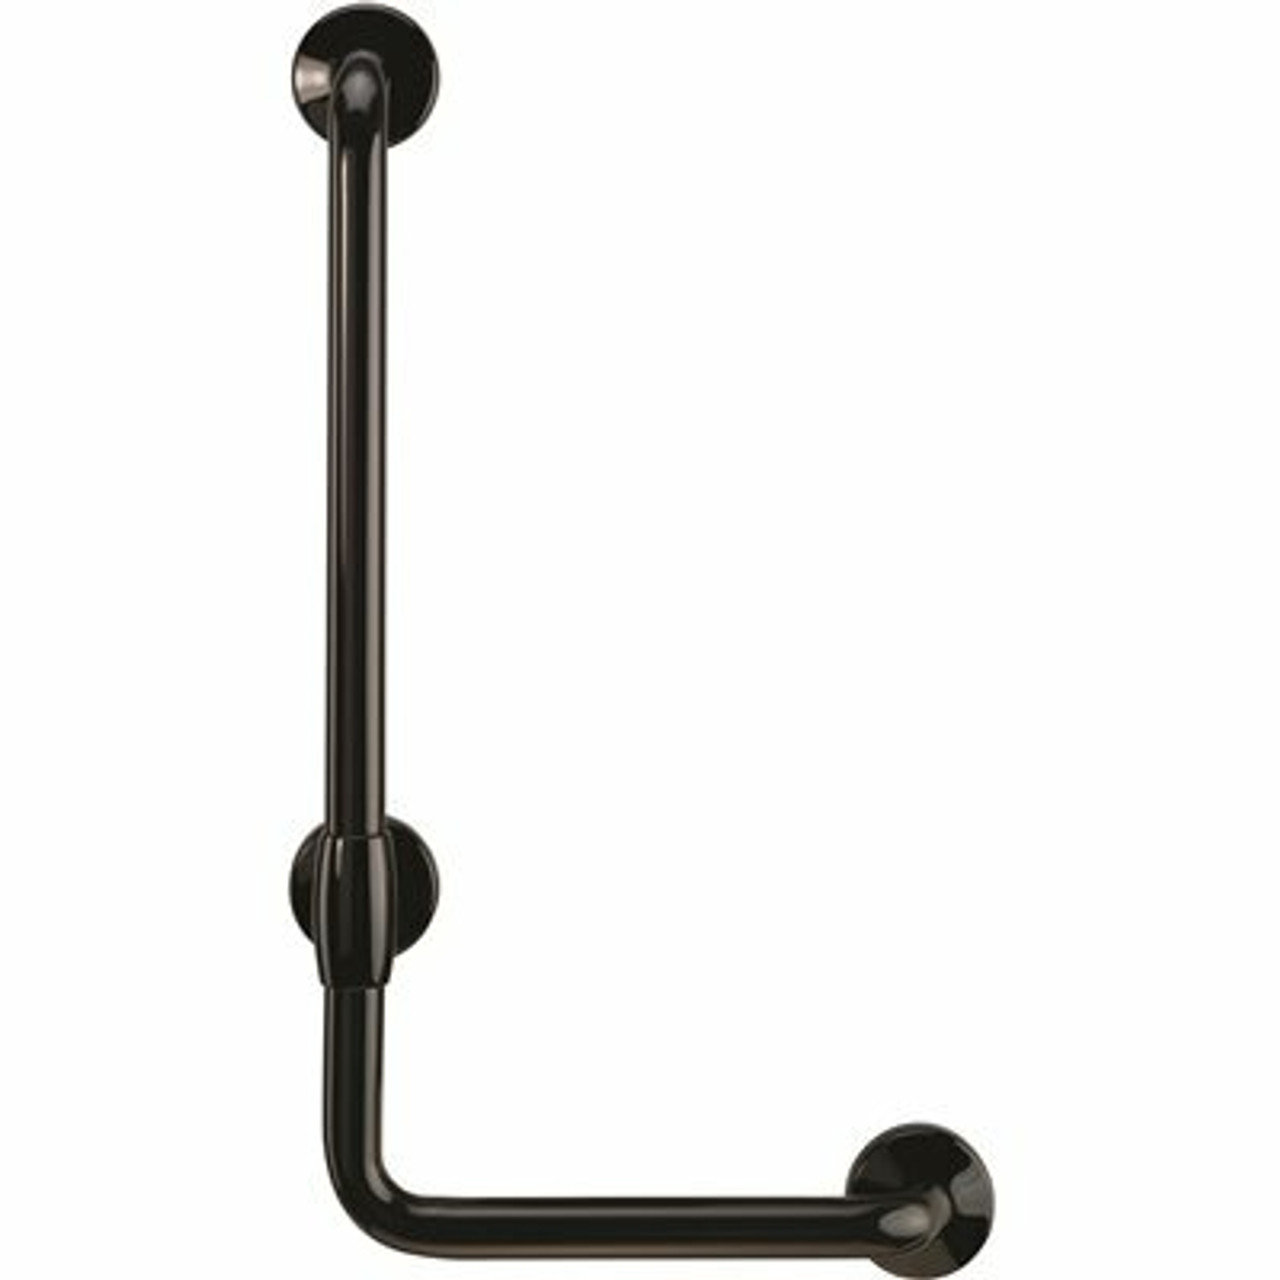 Ponte Giulio Usa 36 In. Contractor Antimicrobial Vinyl Coated L-Shape Grab Bar In Black - 318113357